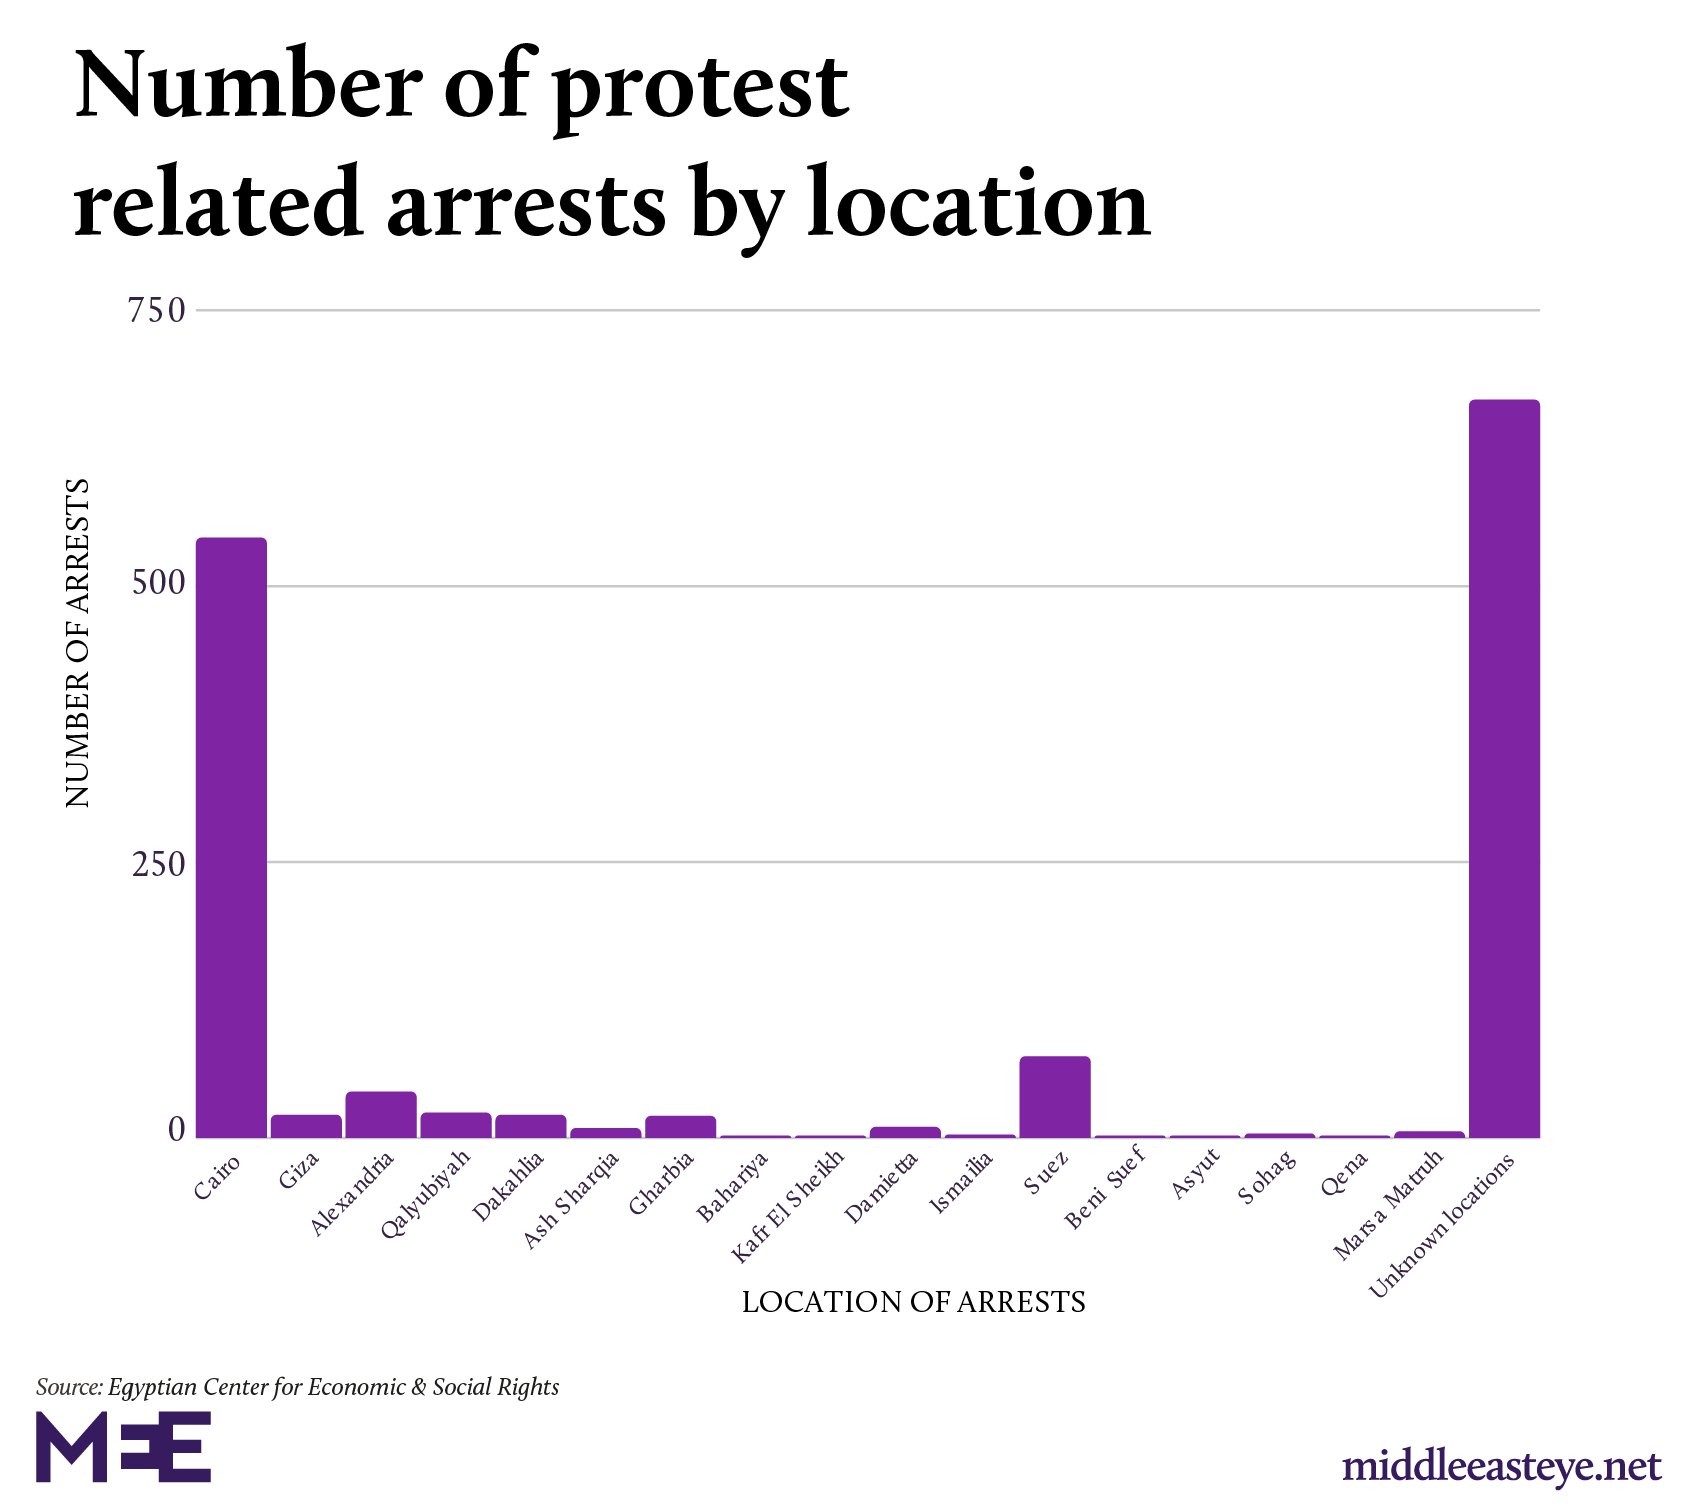 Location of protest related arrests Egypt 2019